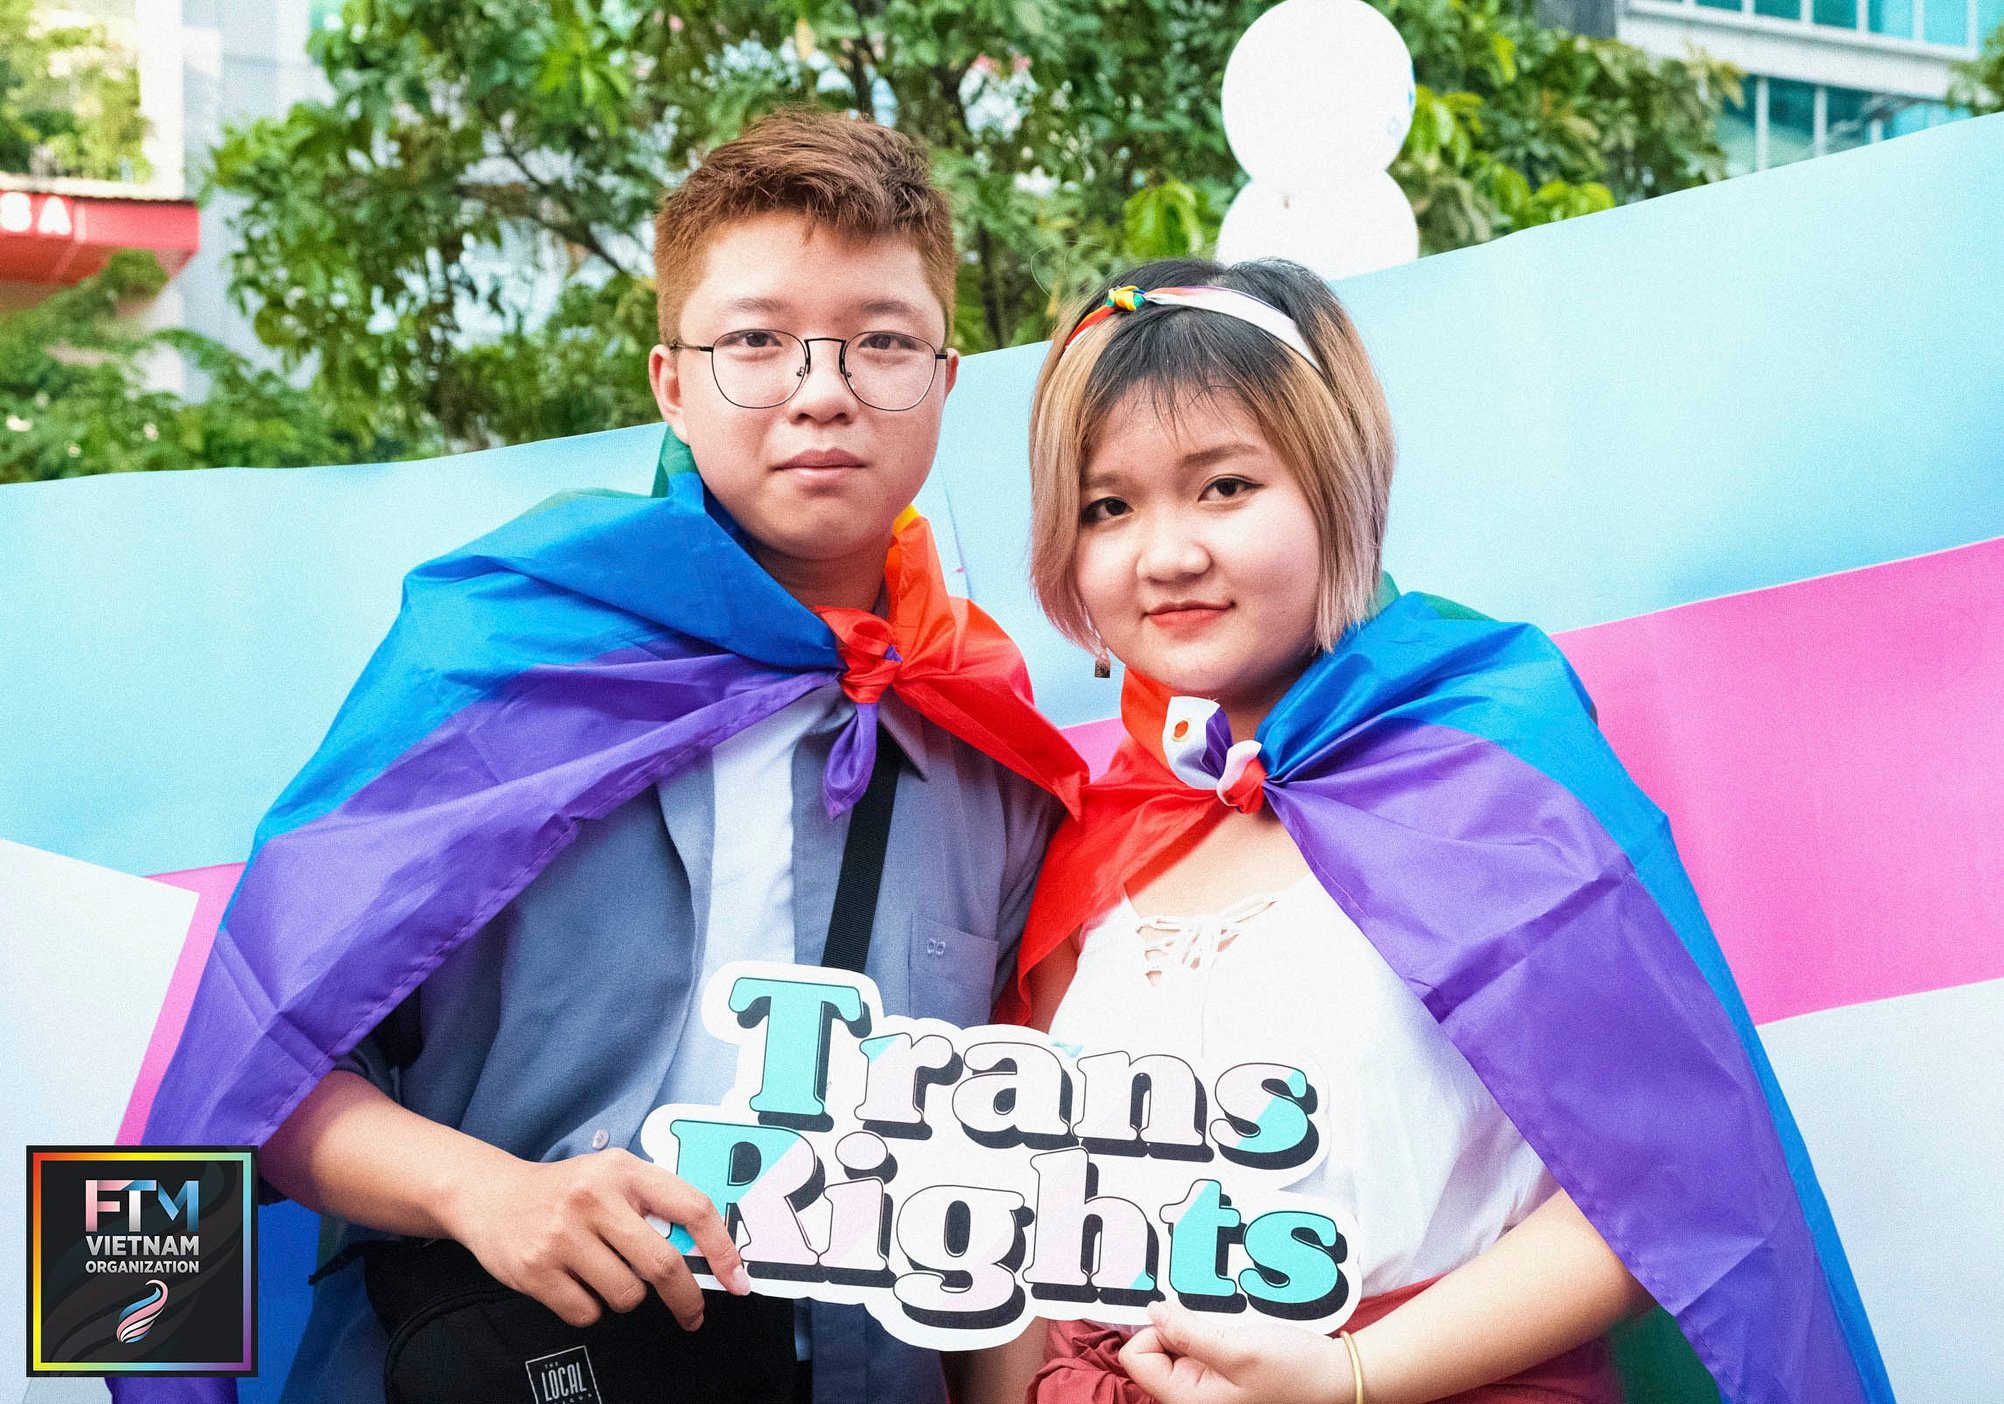 It is time for Viet Nam to walk the talk on trans rights